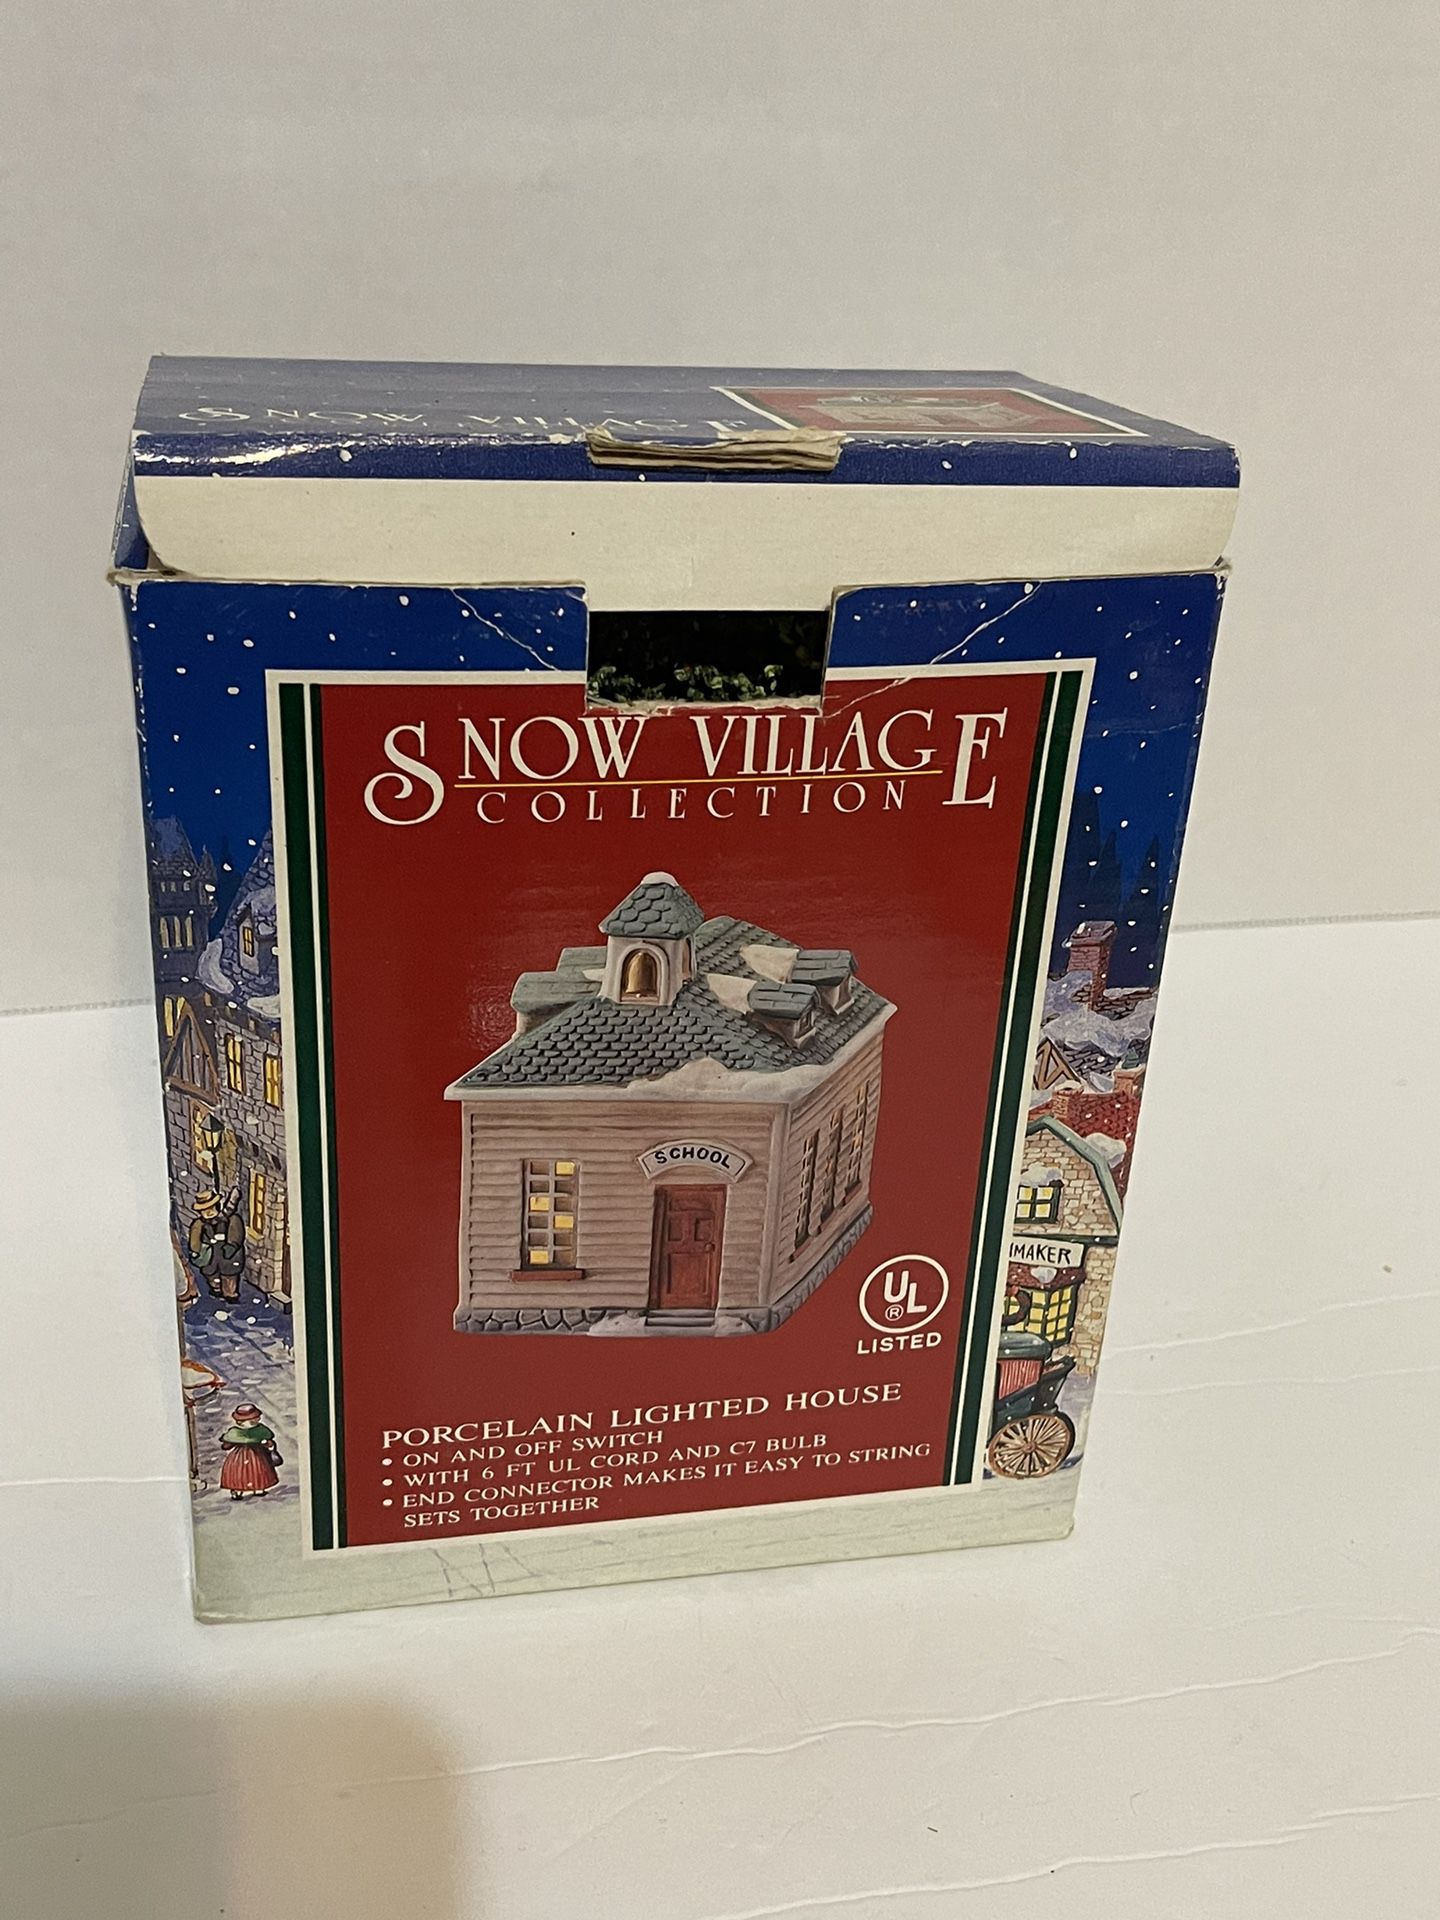 Snow Village Collection porcelain lighted schoolhouse with trees in original box. 